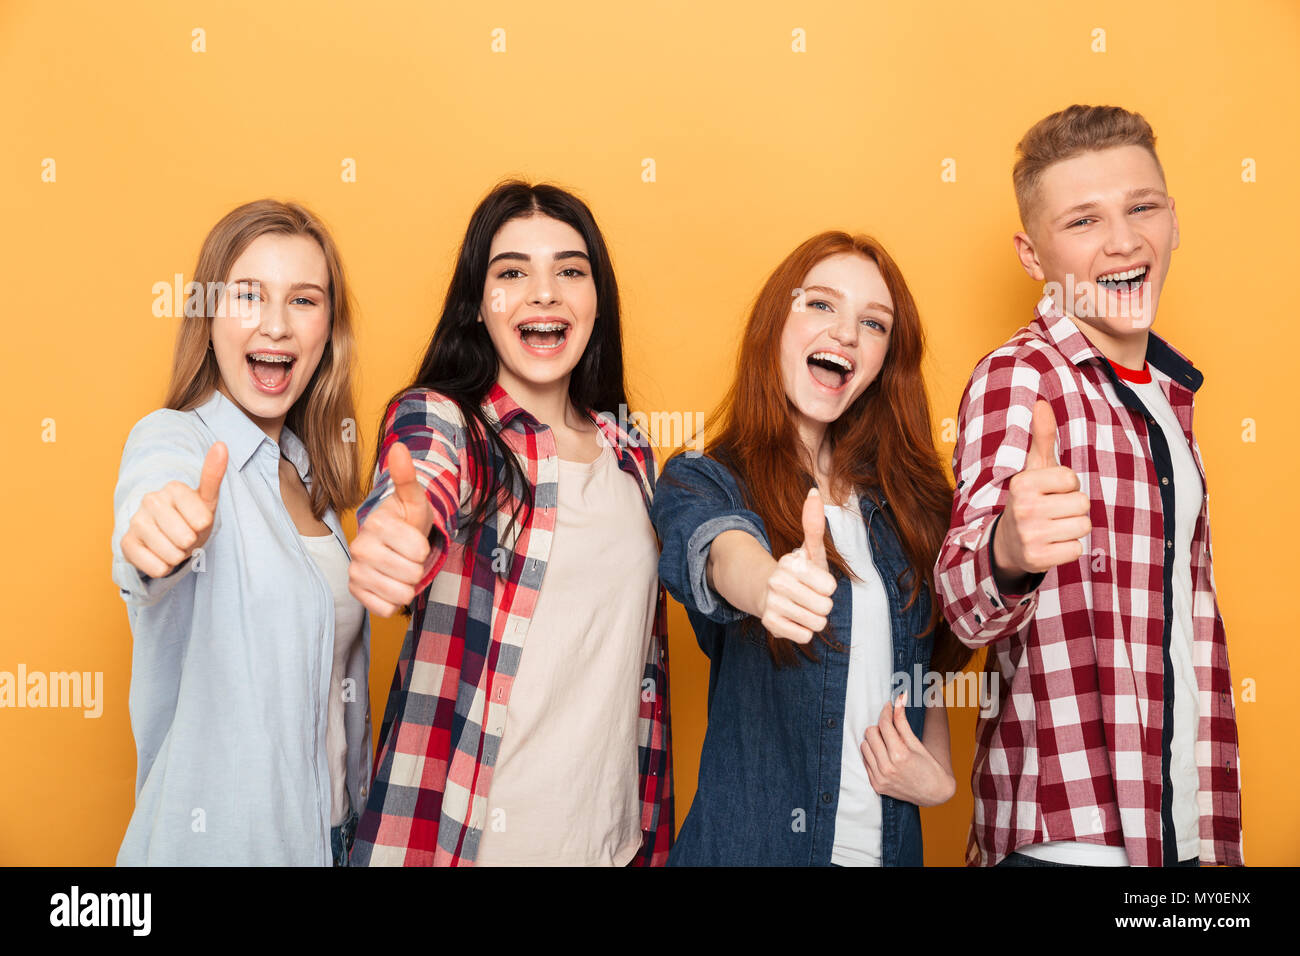 Group of smiling school friends showing thumbs up while standing together over yellow background Stock Photo